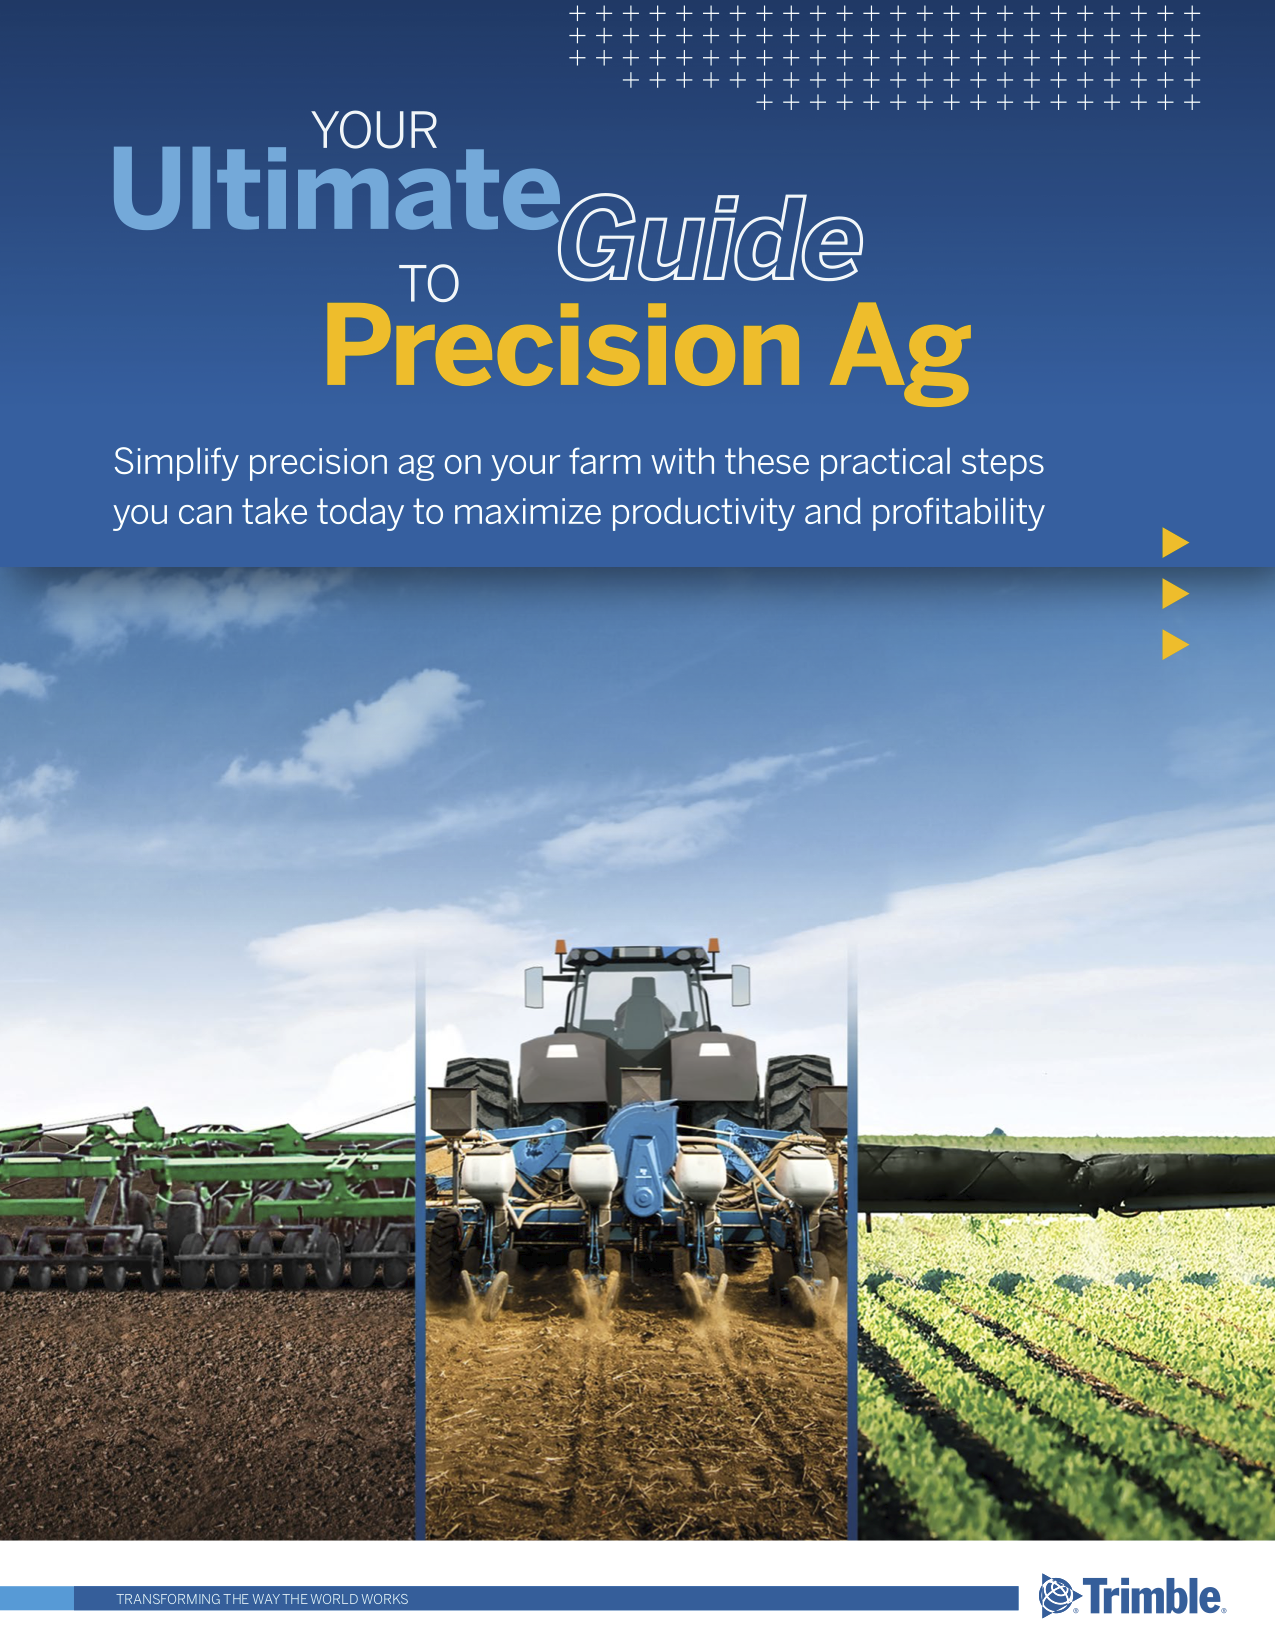 Your Ulitmate Guide to Precision Ag ebook cover